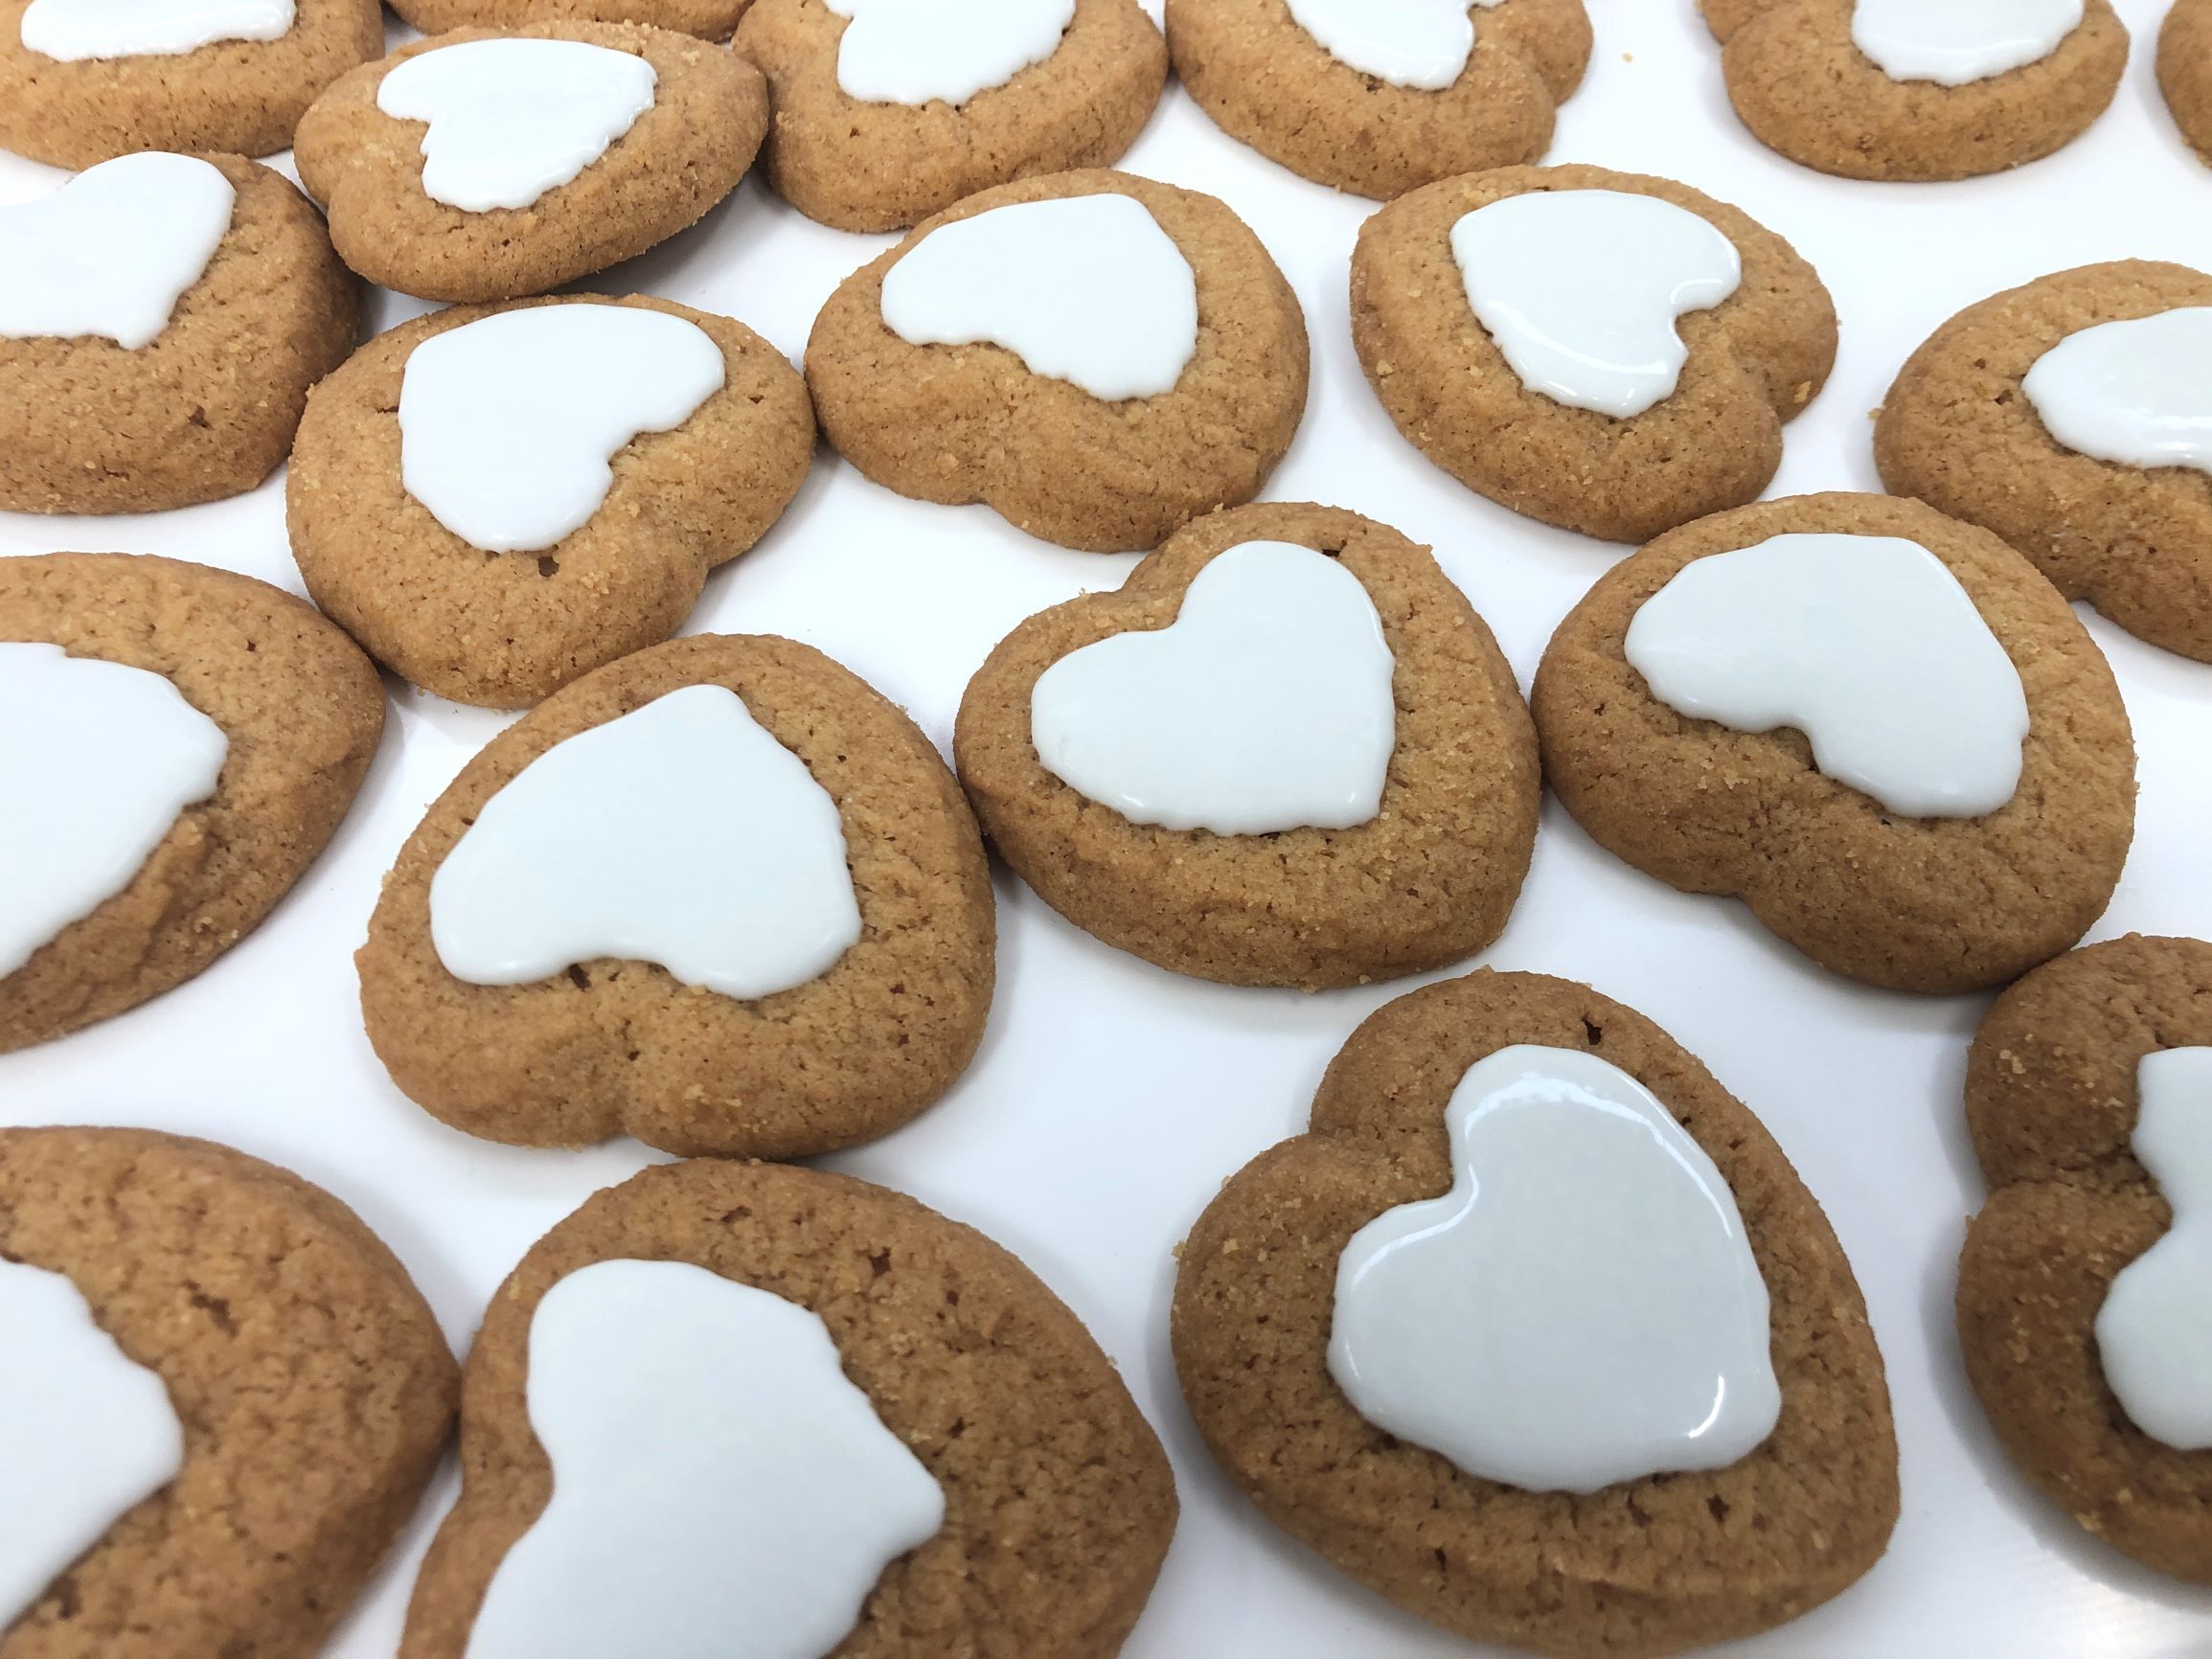 Hearth shaped biscuit with white chocolate heart printed on it by FoodJet chocolate depositor